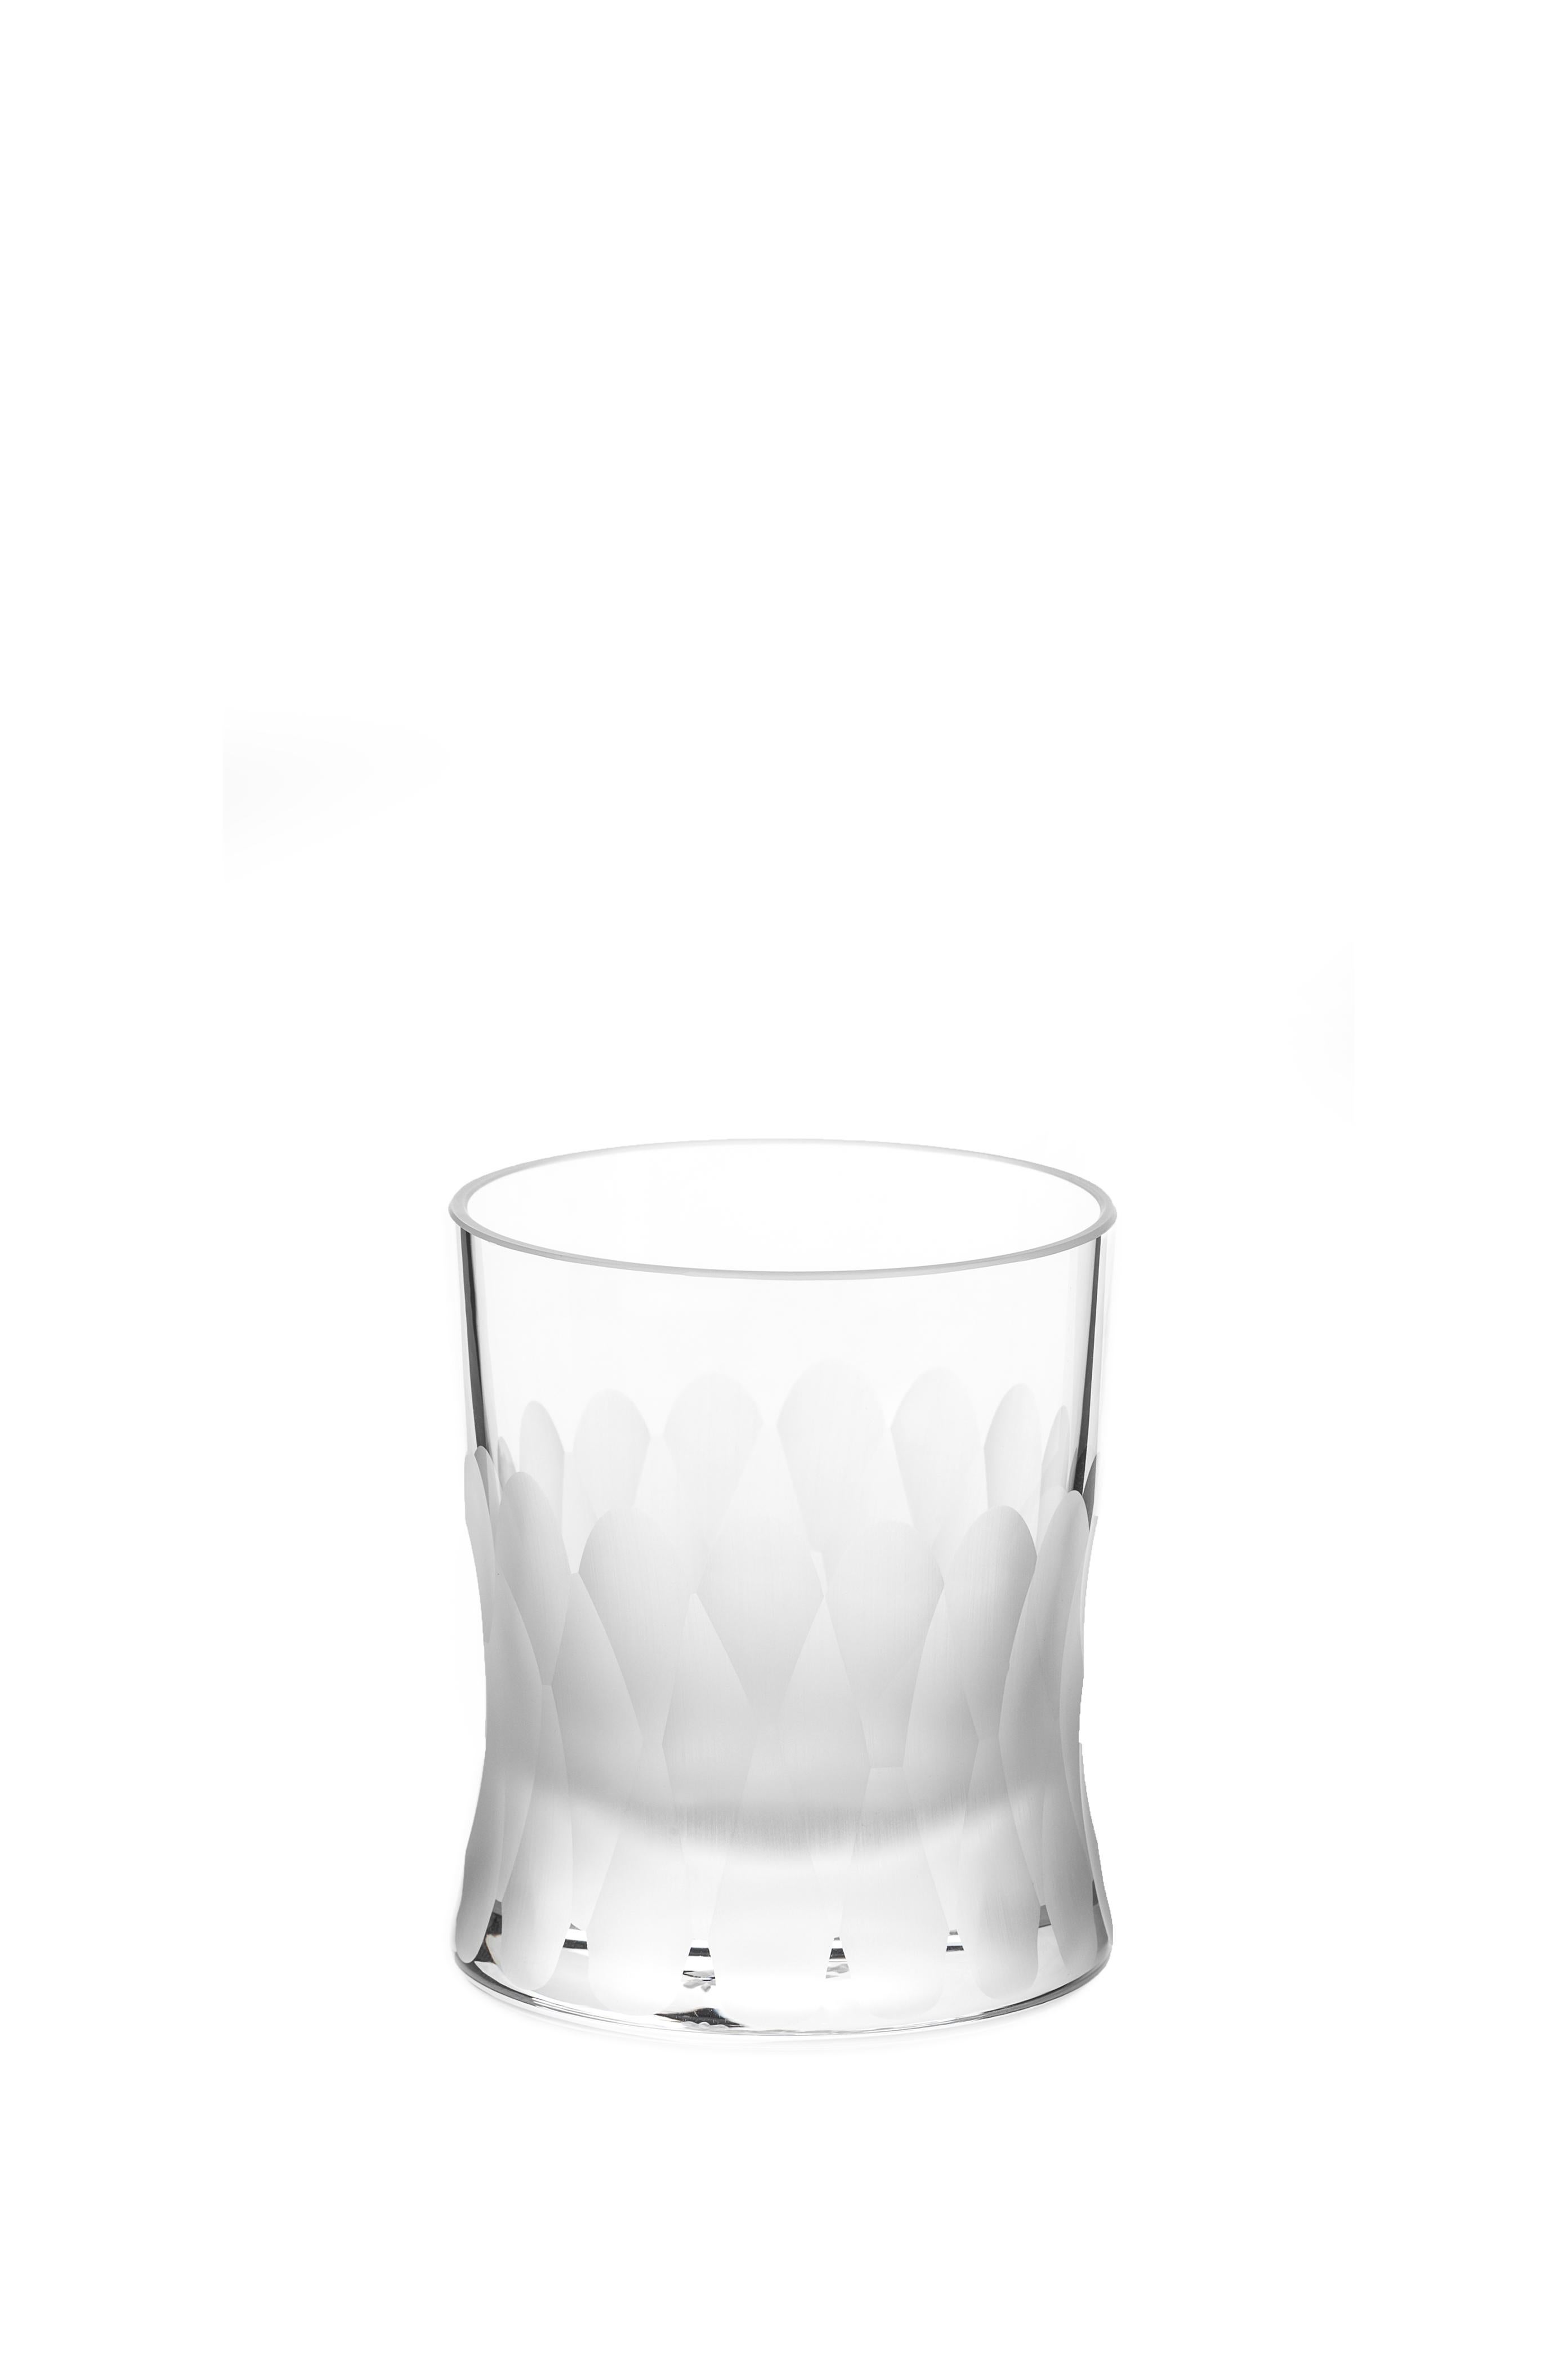 Martino Gamper Handmade Irish Crystal Whiskey Tumbler Cuttings Series CUT II In New Condition For Sale In Ballyduff, IE